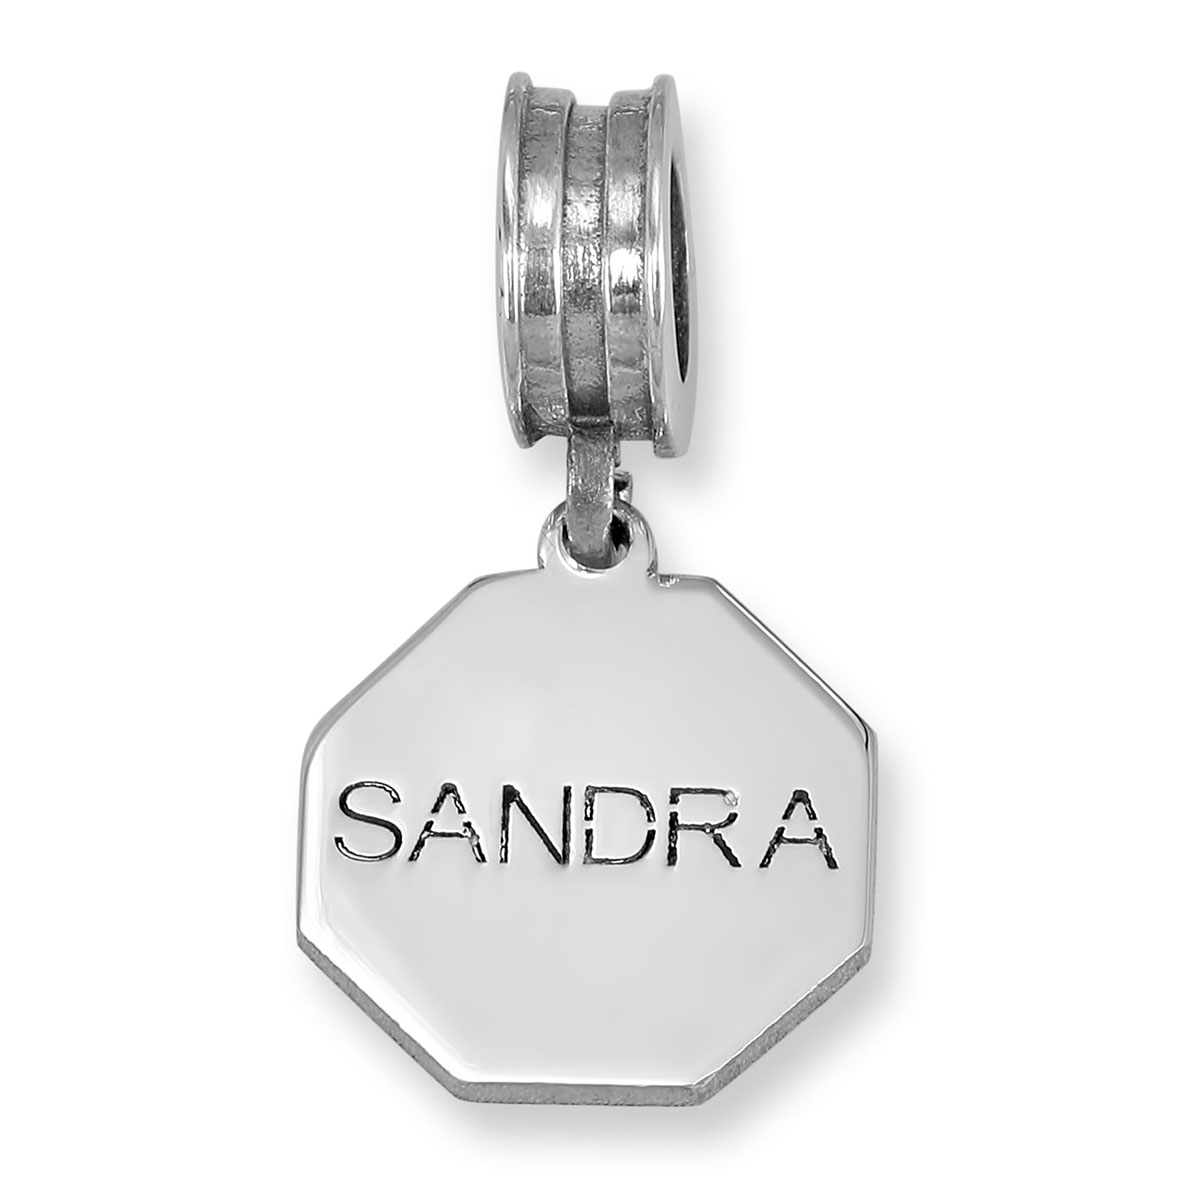 Octagonal Sterling Silver Name Charm (English / Hebrew)  - 1